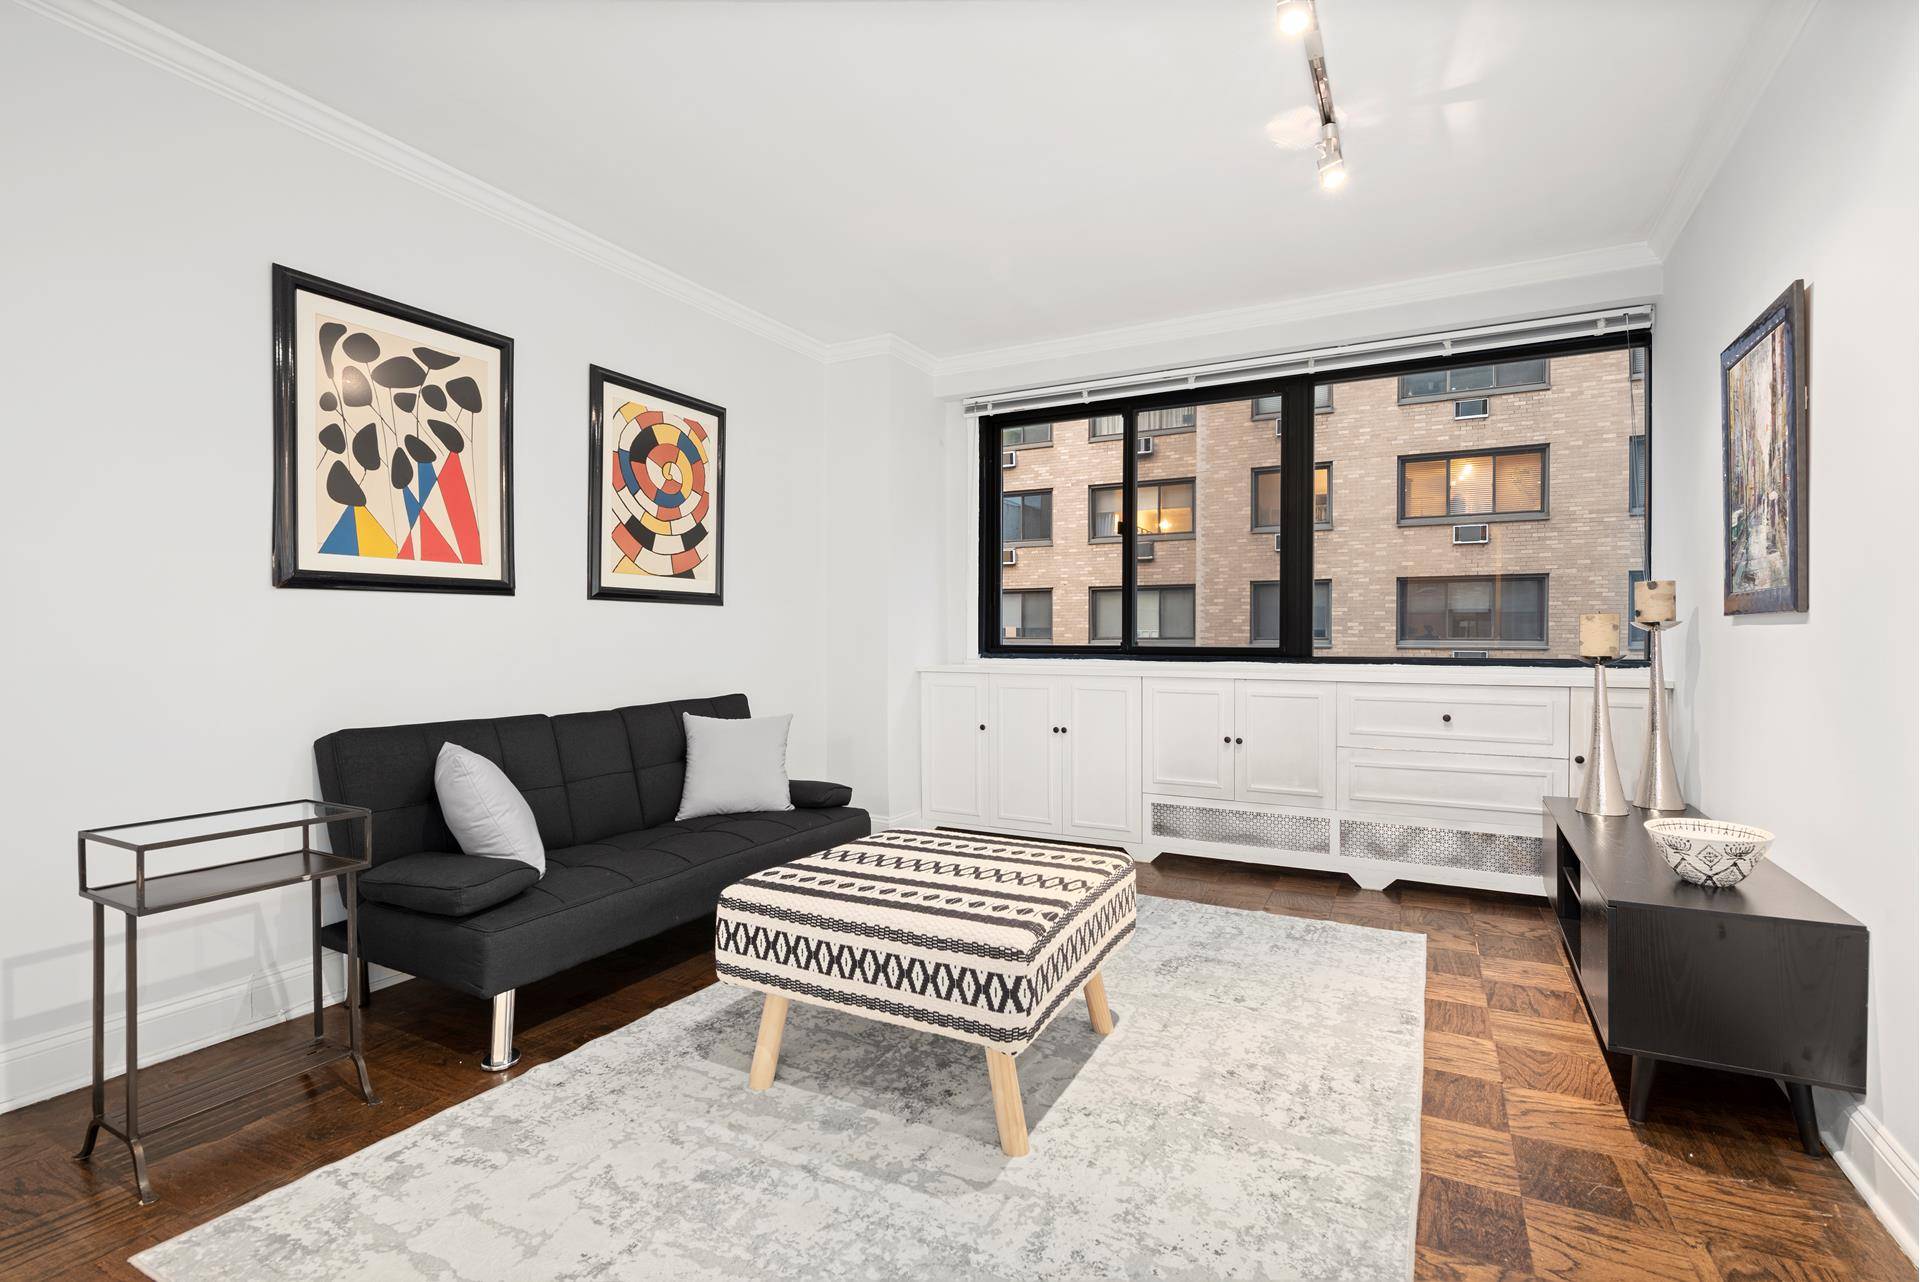 Welcome home ! Apartment 7GS at The Chelsea Lane is a stunning Jr 1 bedroom L studio with recently renovated bath, updated kitchen, and hardwood flooring throughout the living area.